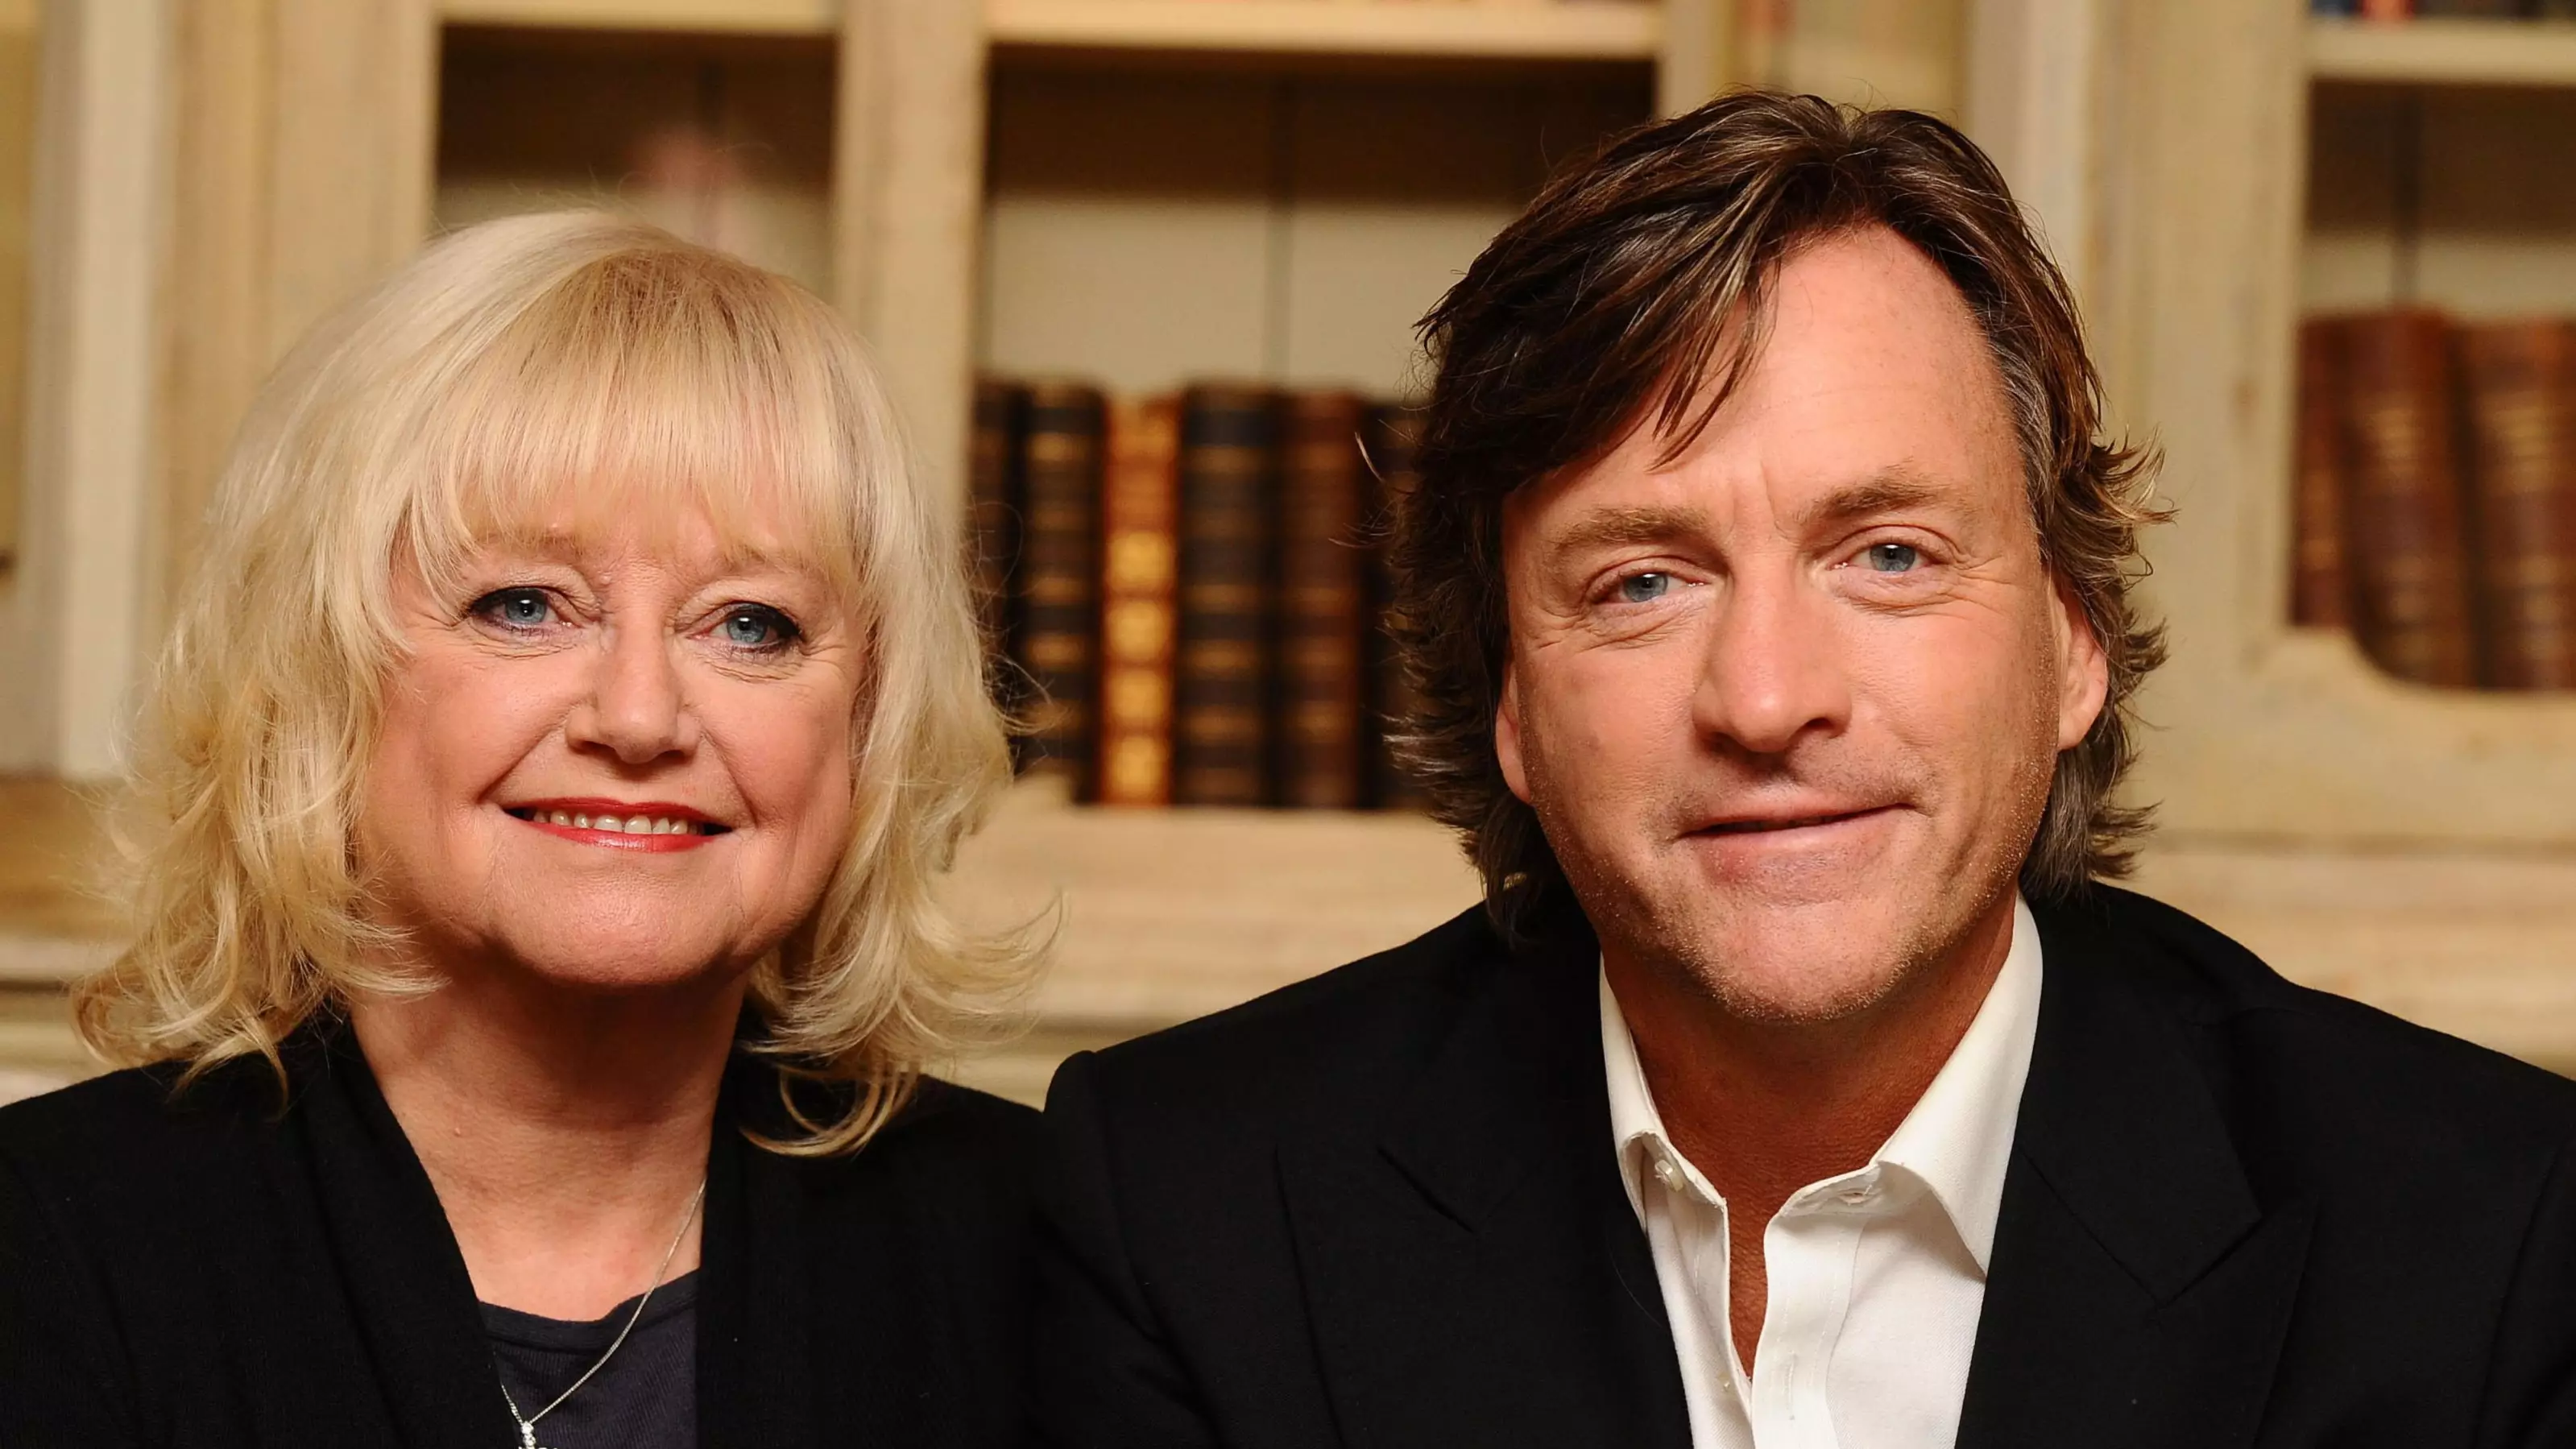 'Richard & Judy: Keep Reading' Will See Hosting Duo Make Big TV Return On Channel 4